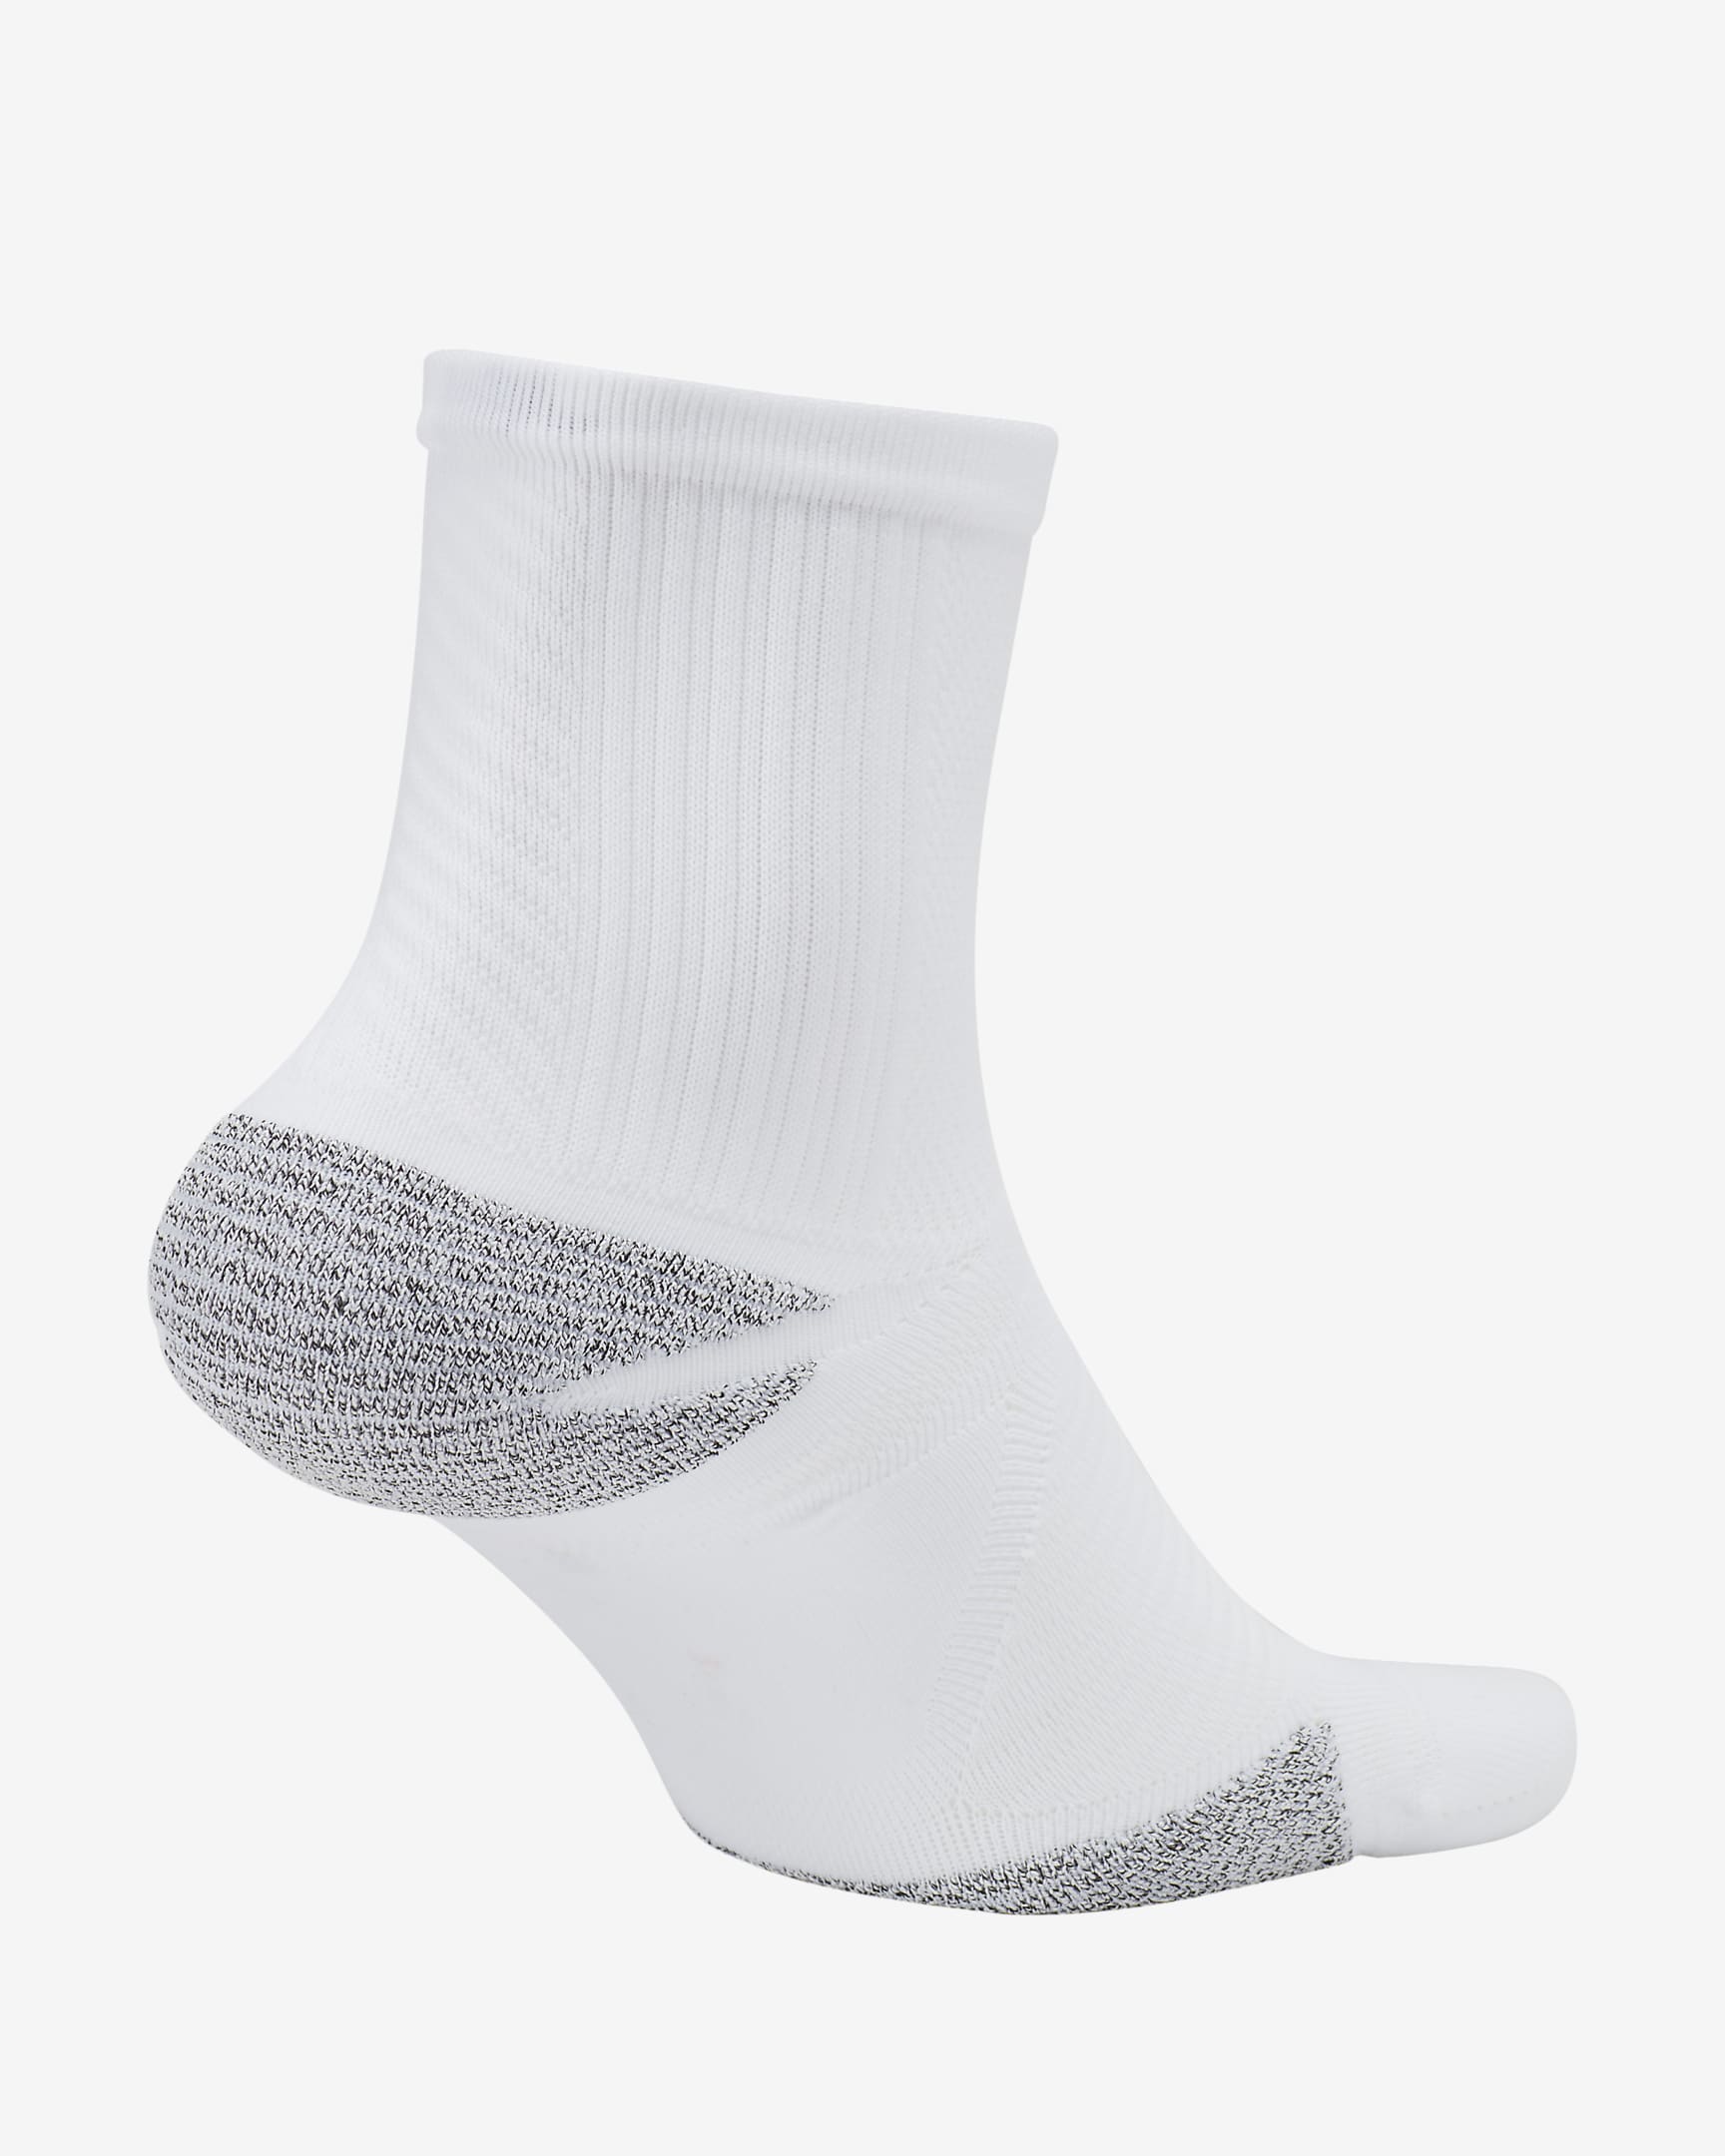 Socquettes Nike Racing - Blanc/Reflect Silver